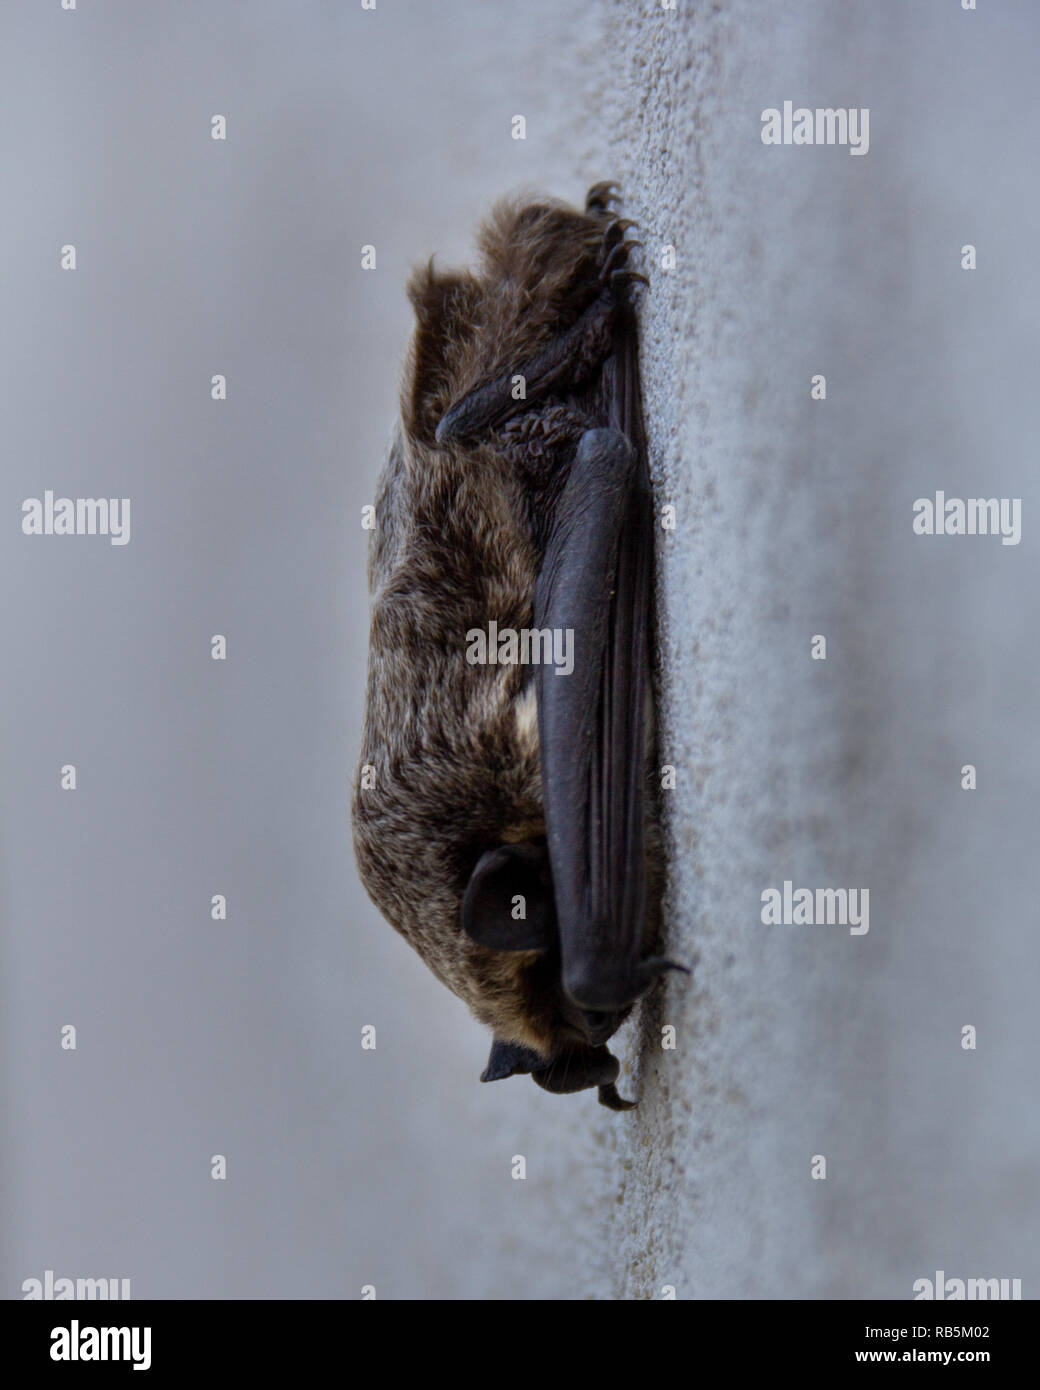 A bat is hanging upside down from a textured white wall Stock Photo